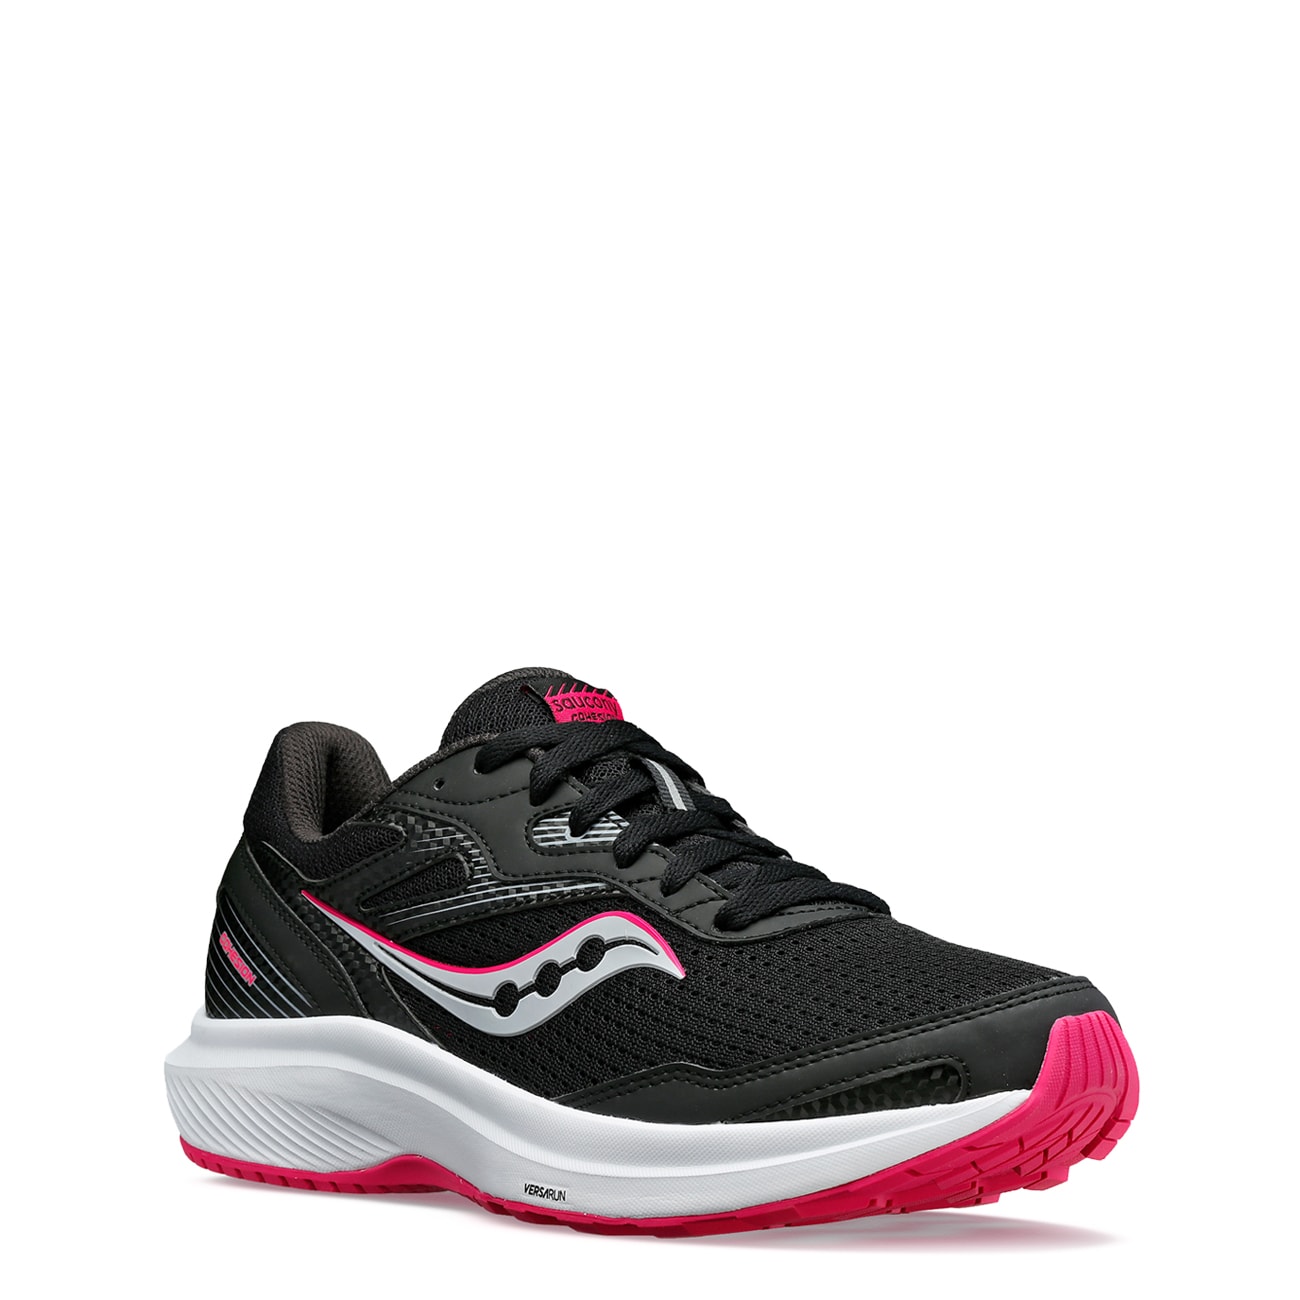 Women's Cohesion 16 Wide Running Shoe